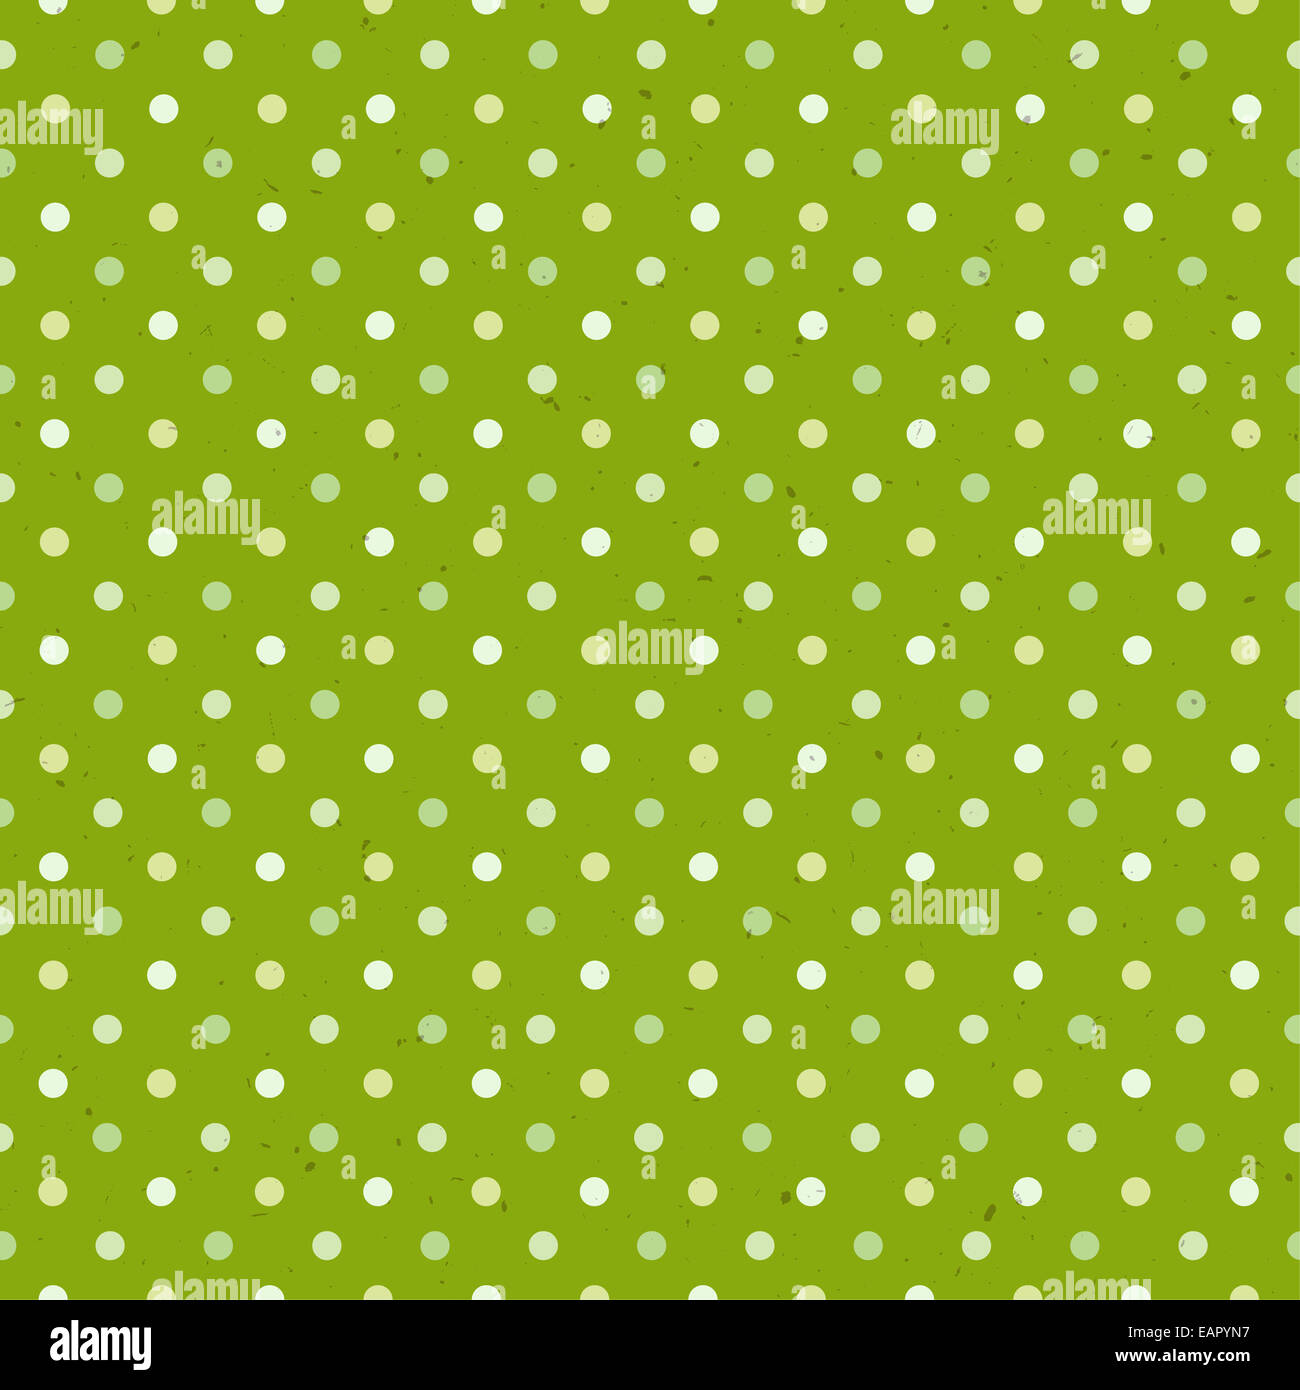 Polka dot background green and white Stock Photo by ©keport 94599426